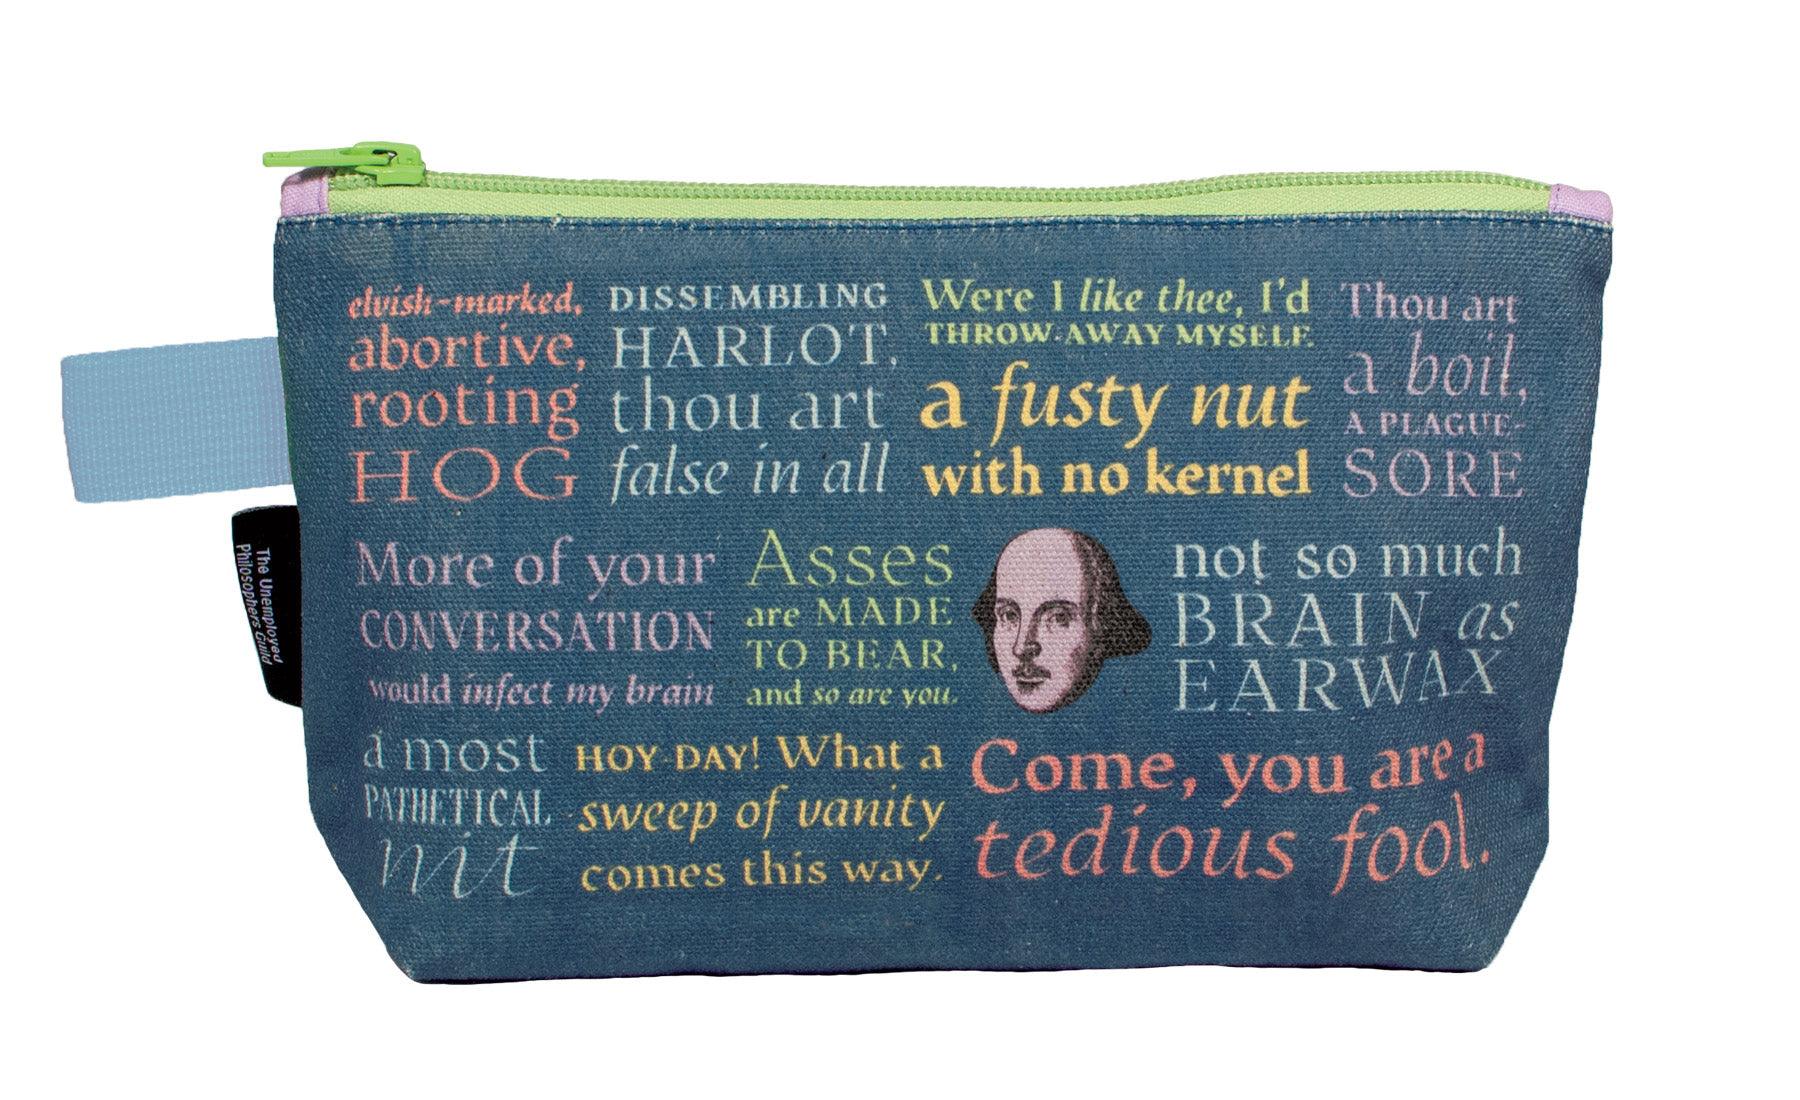 Product photo of Shakespearean Insults Zipper Bag, a novelty gift manufactured by The Unemployed Philosophers Guild.